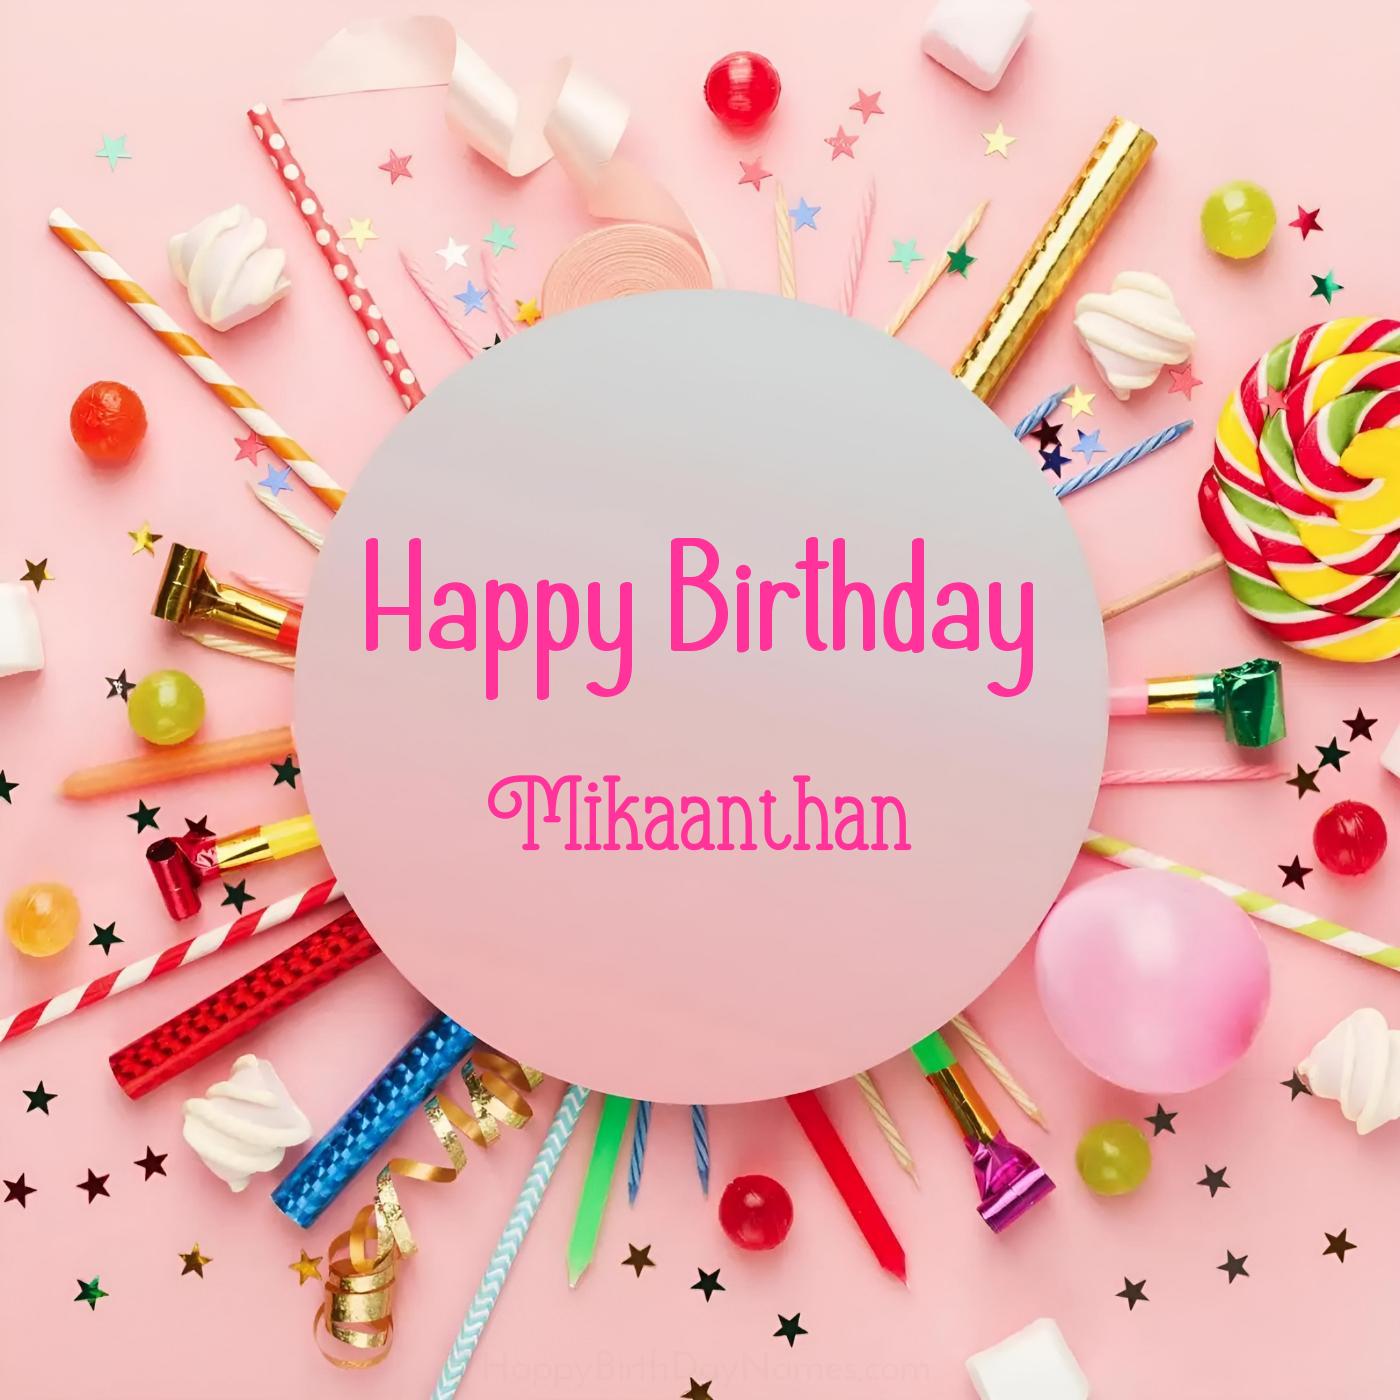 Happy Birthday Mikaanthan Sweets Lollipops Card